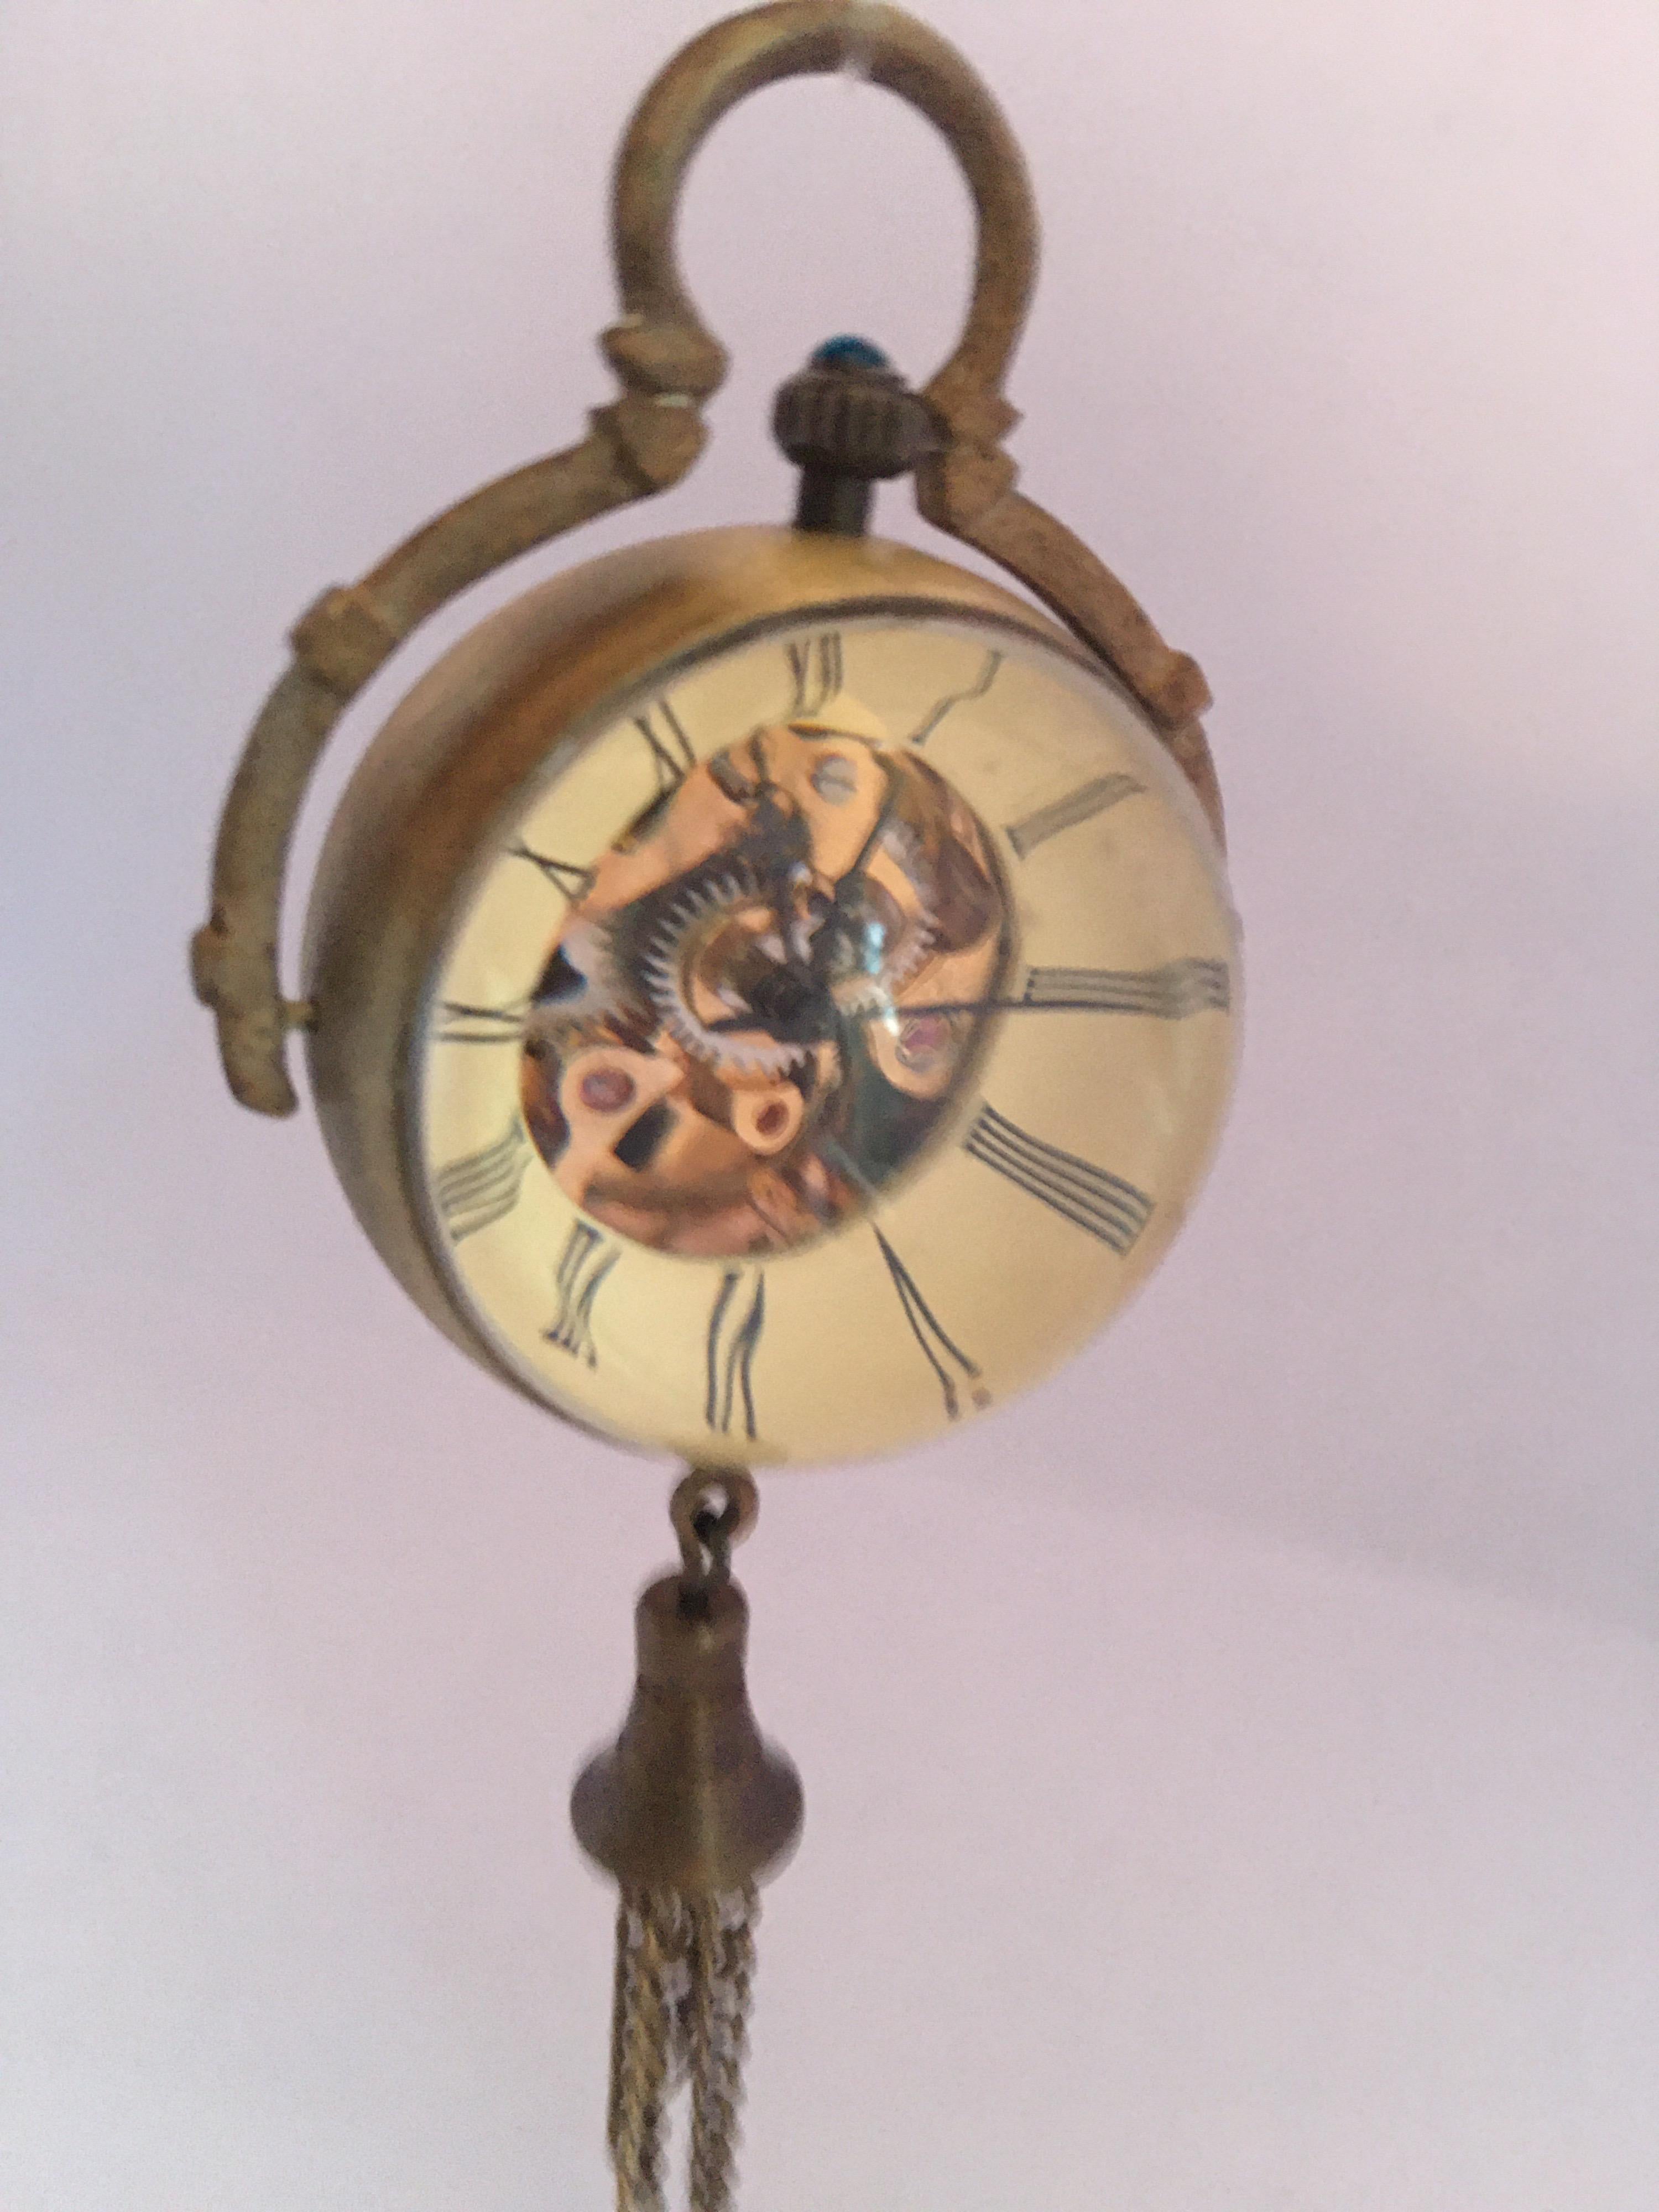 Vintage Mechanical Visible Escapement or Skeleton Pendant Ball Watch For Sale 6